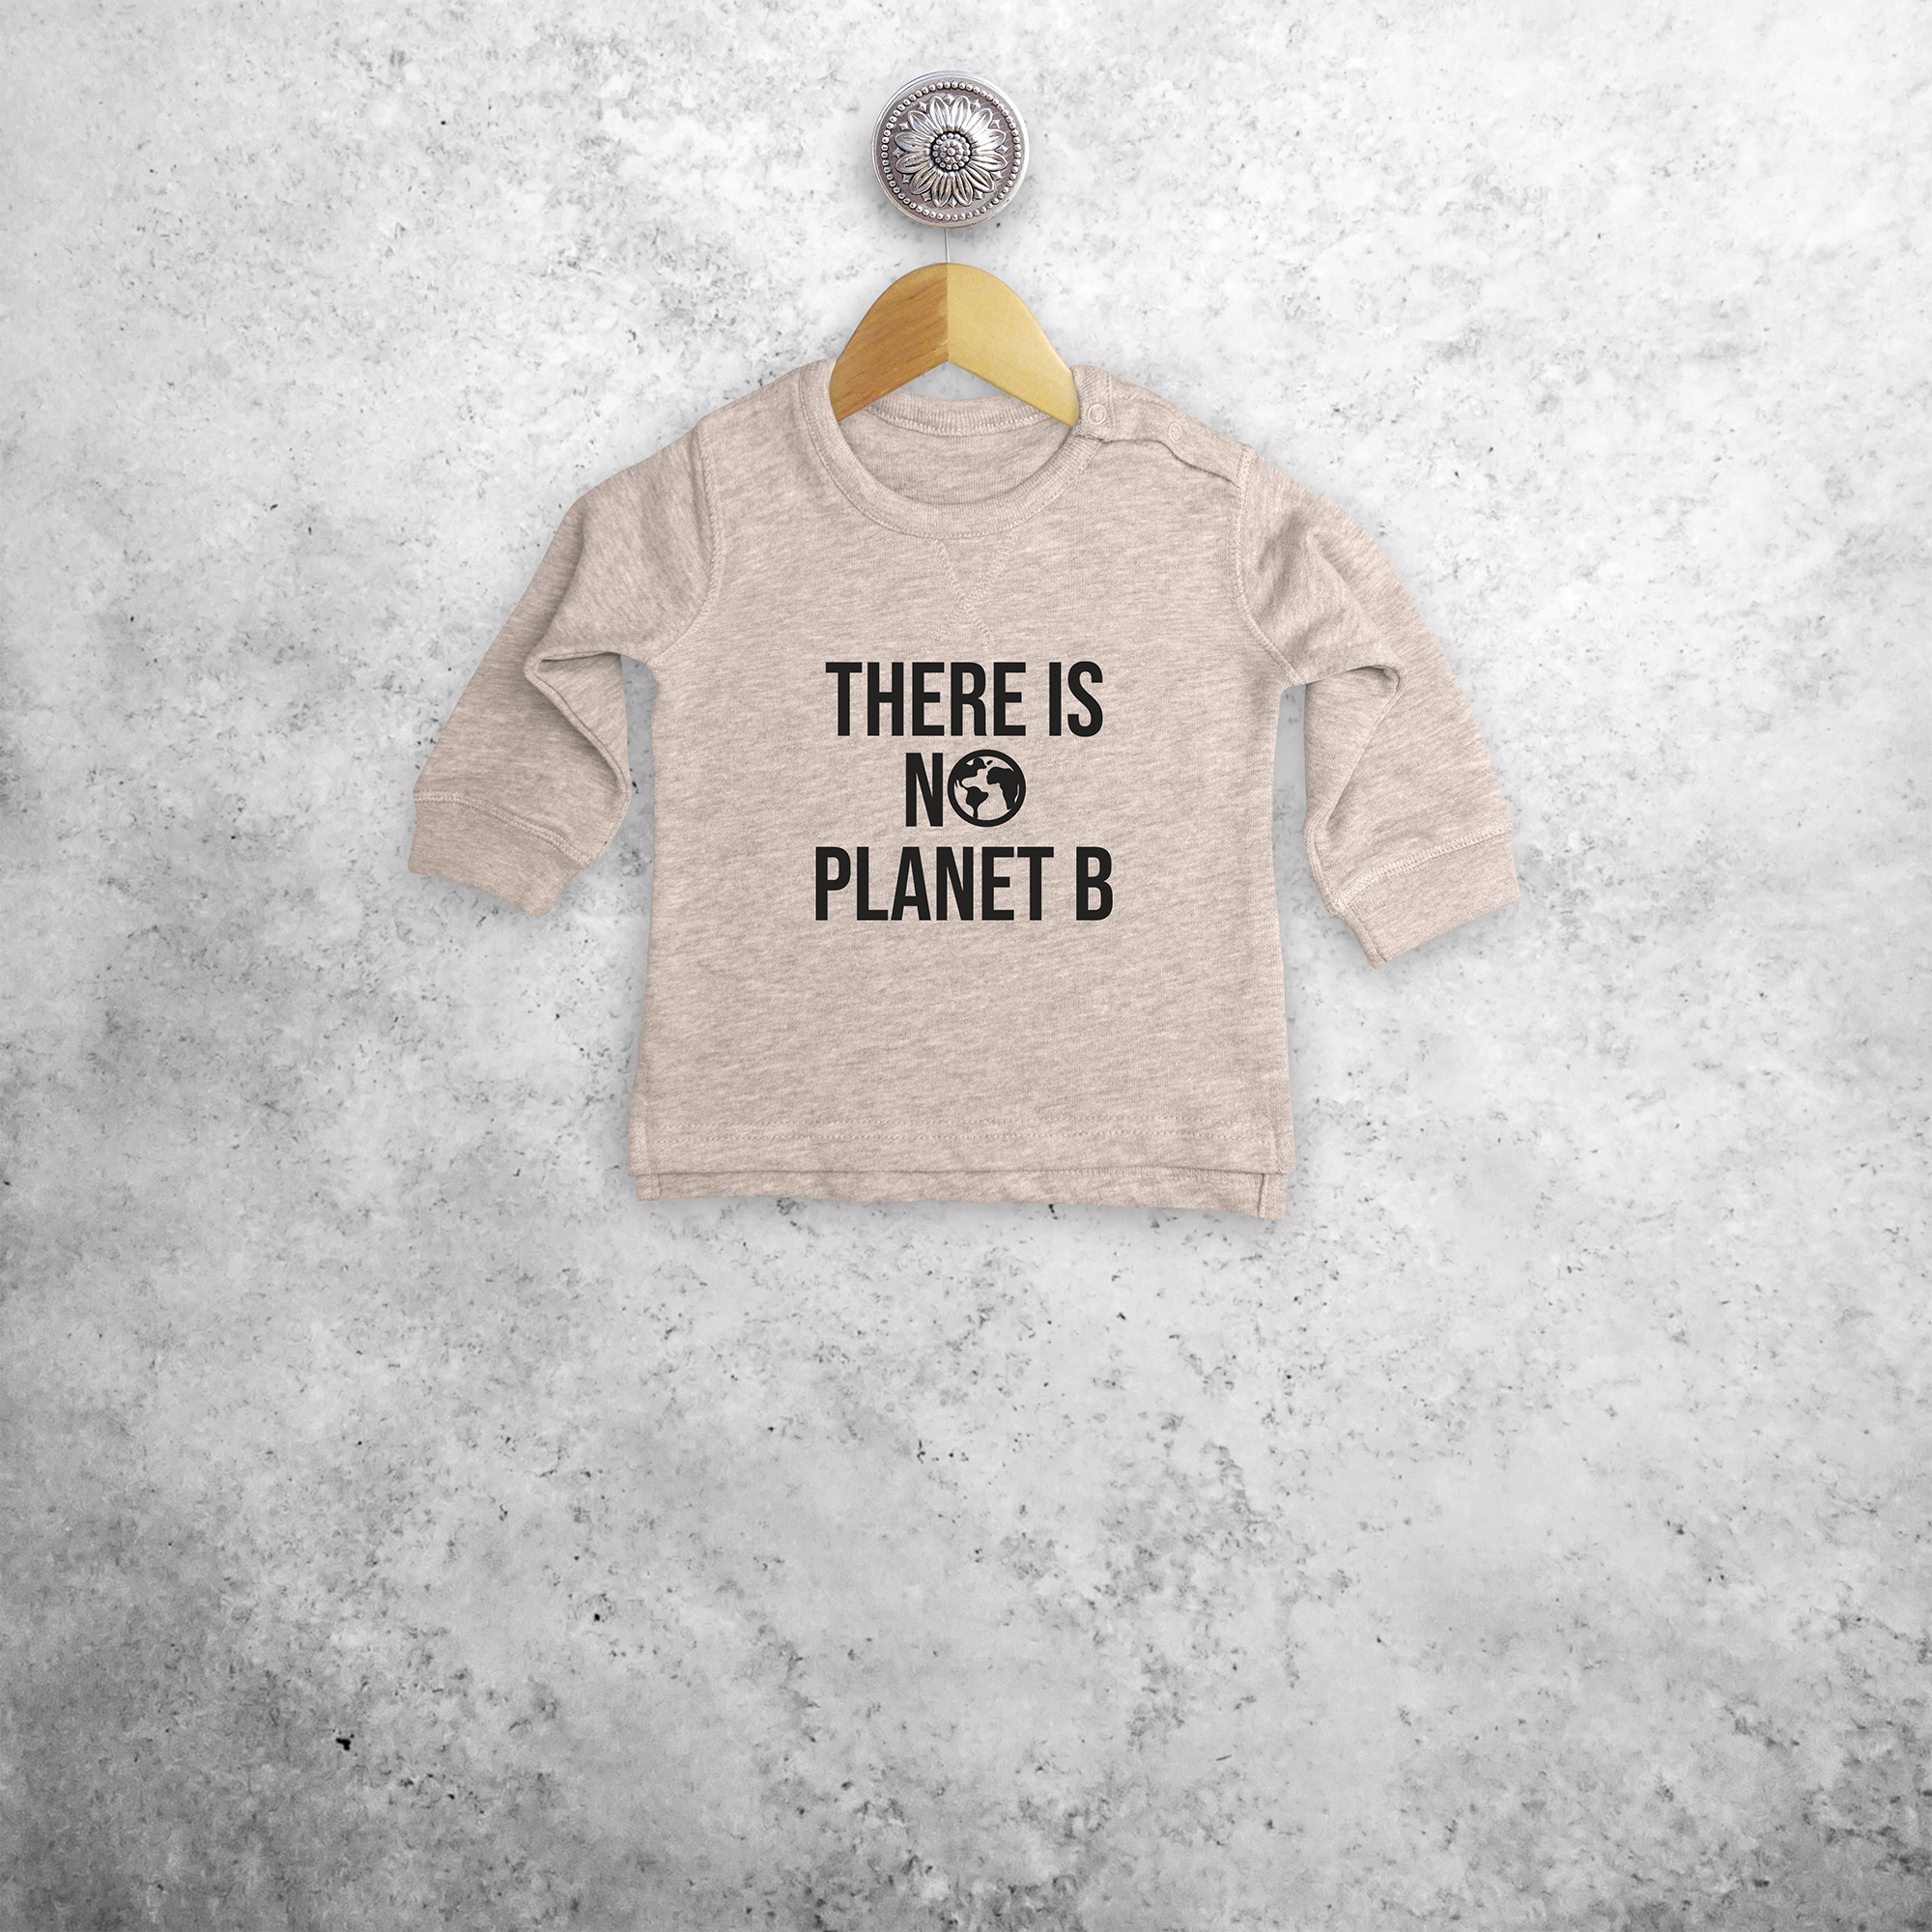 'There is no planet B' baby trui